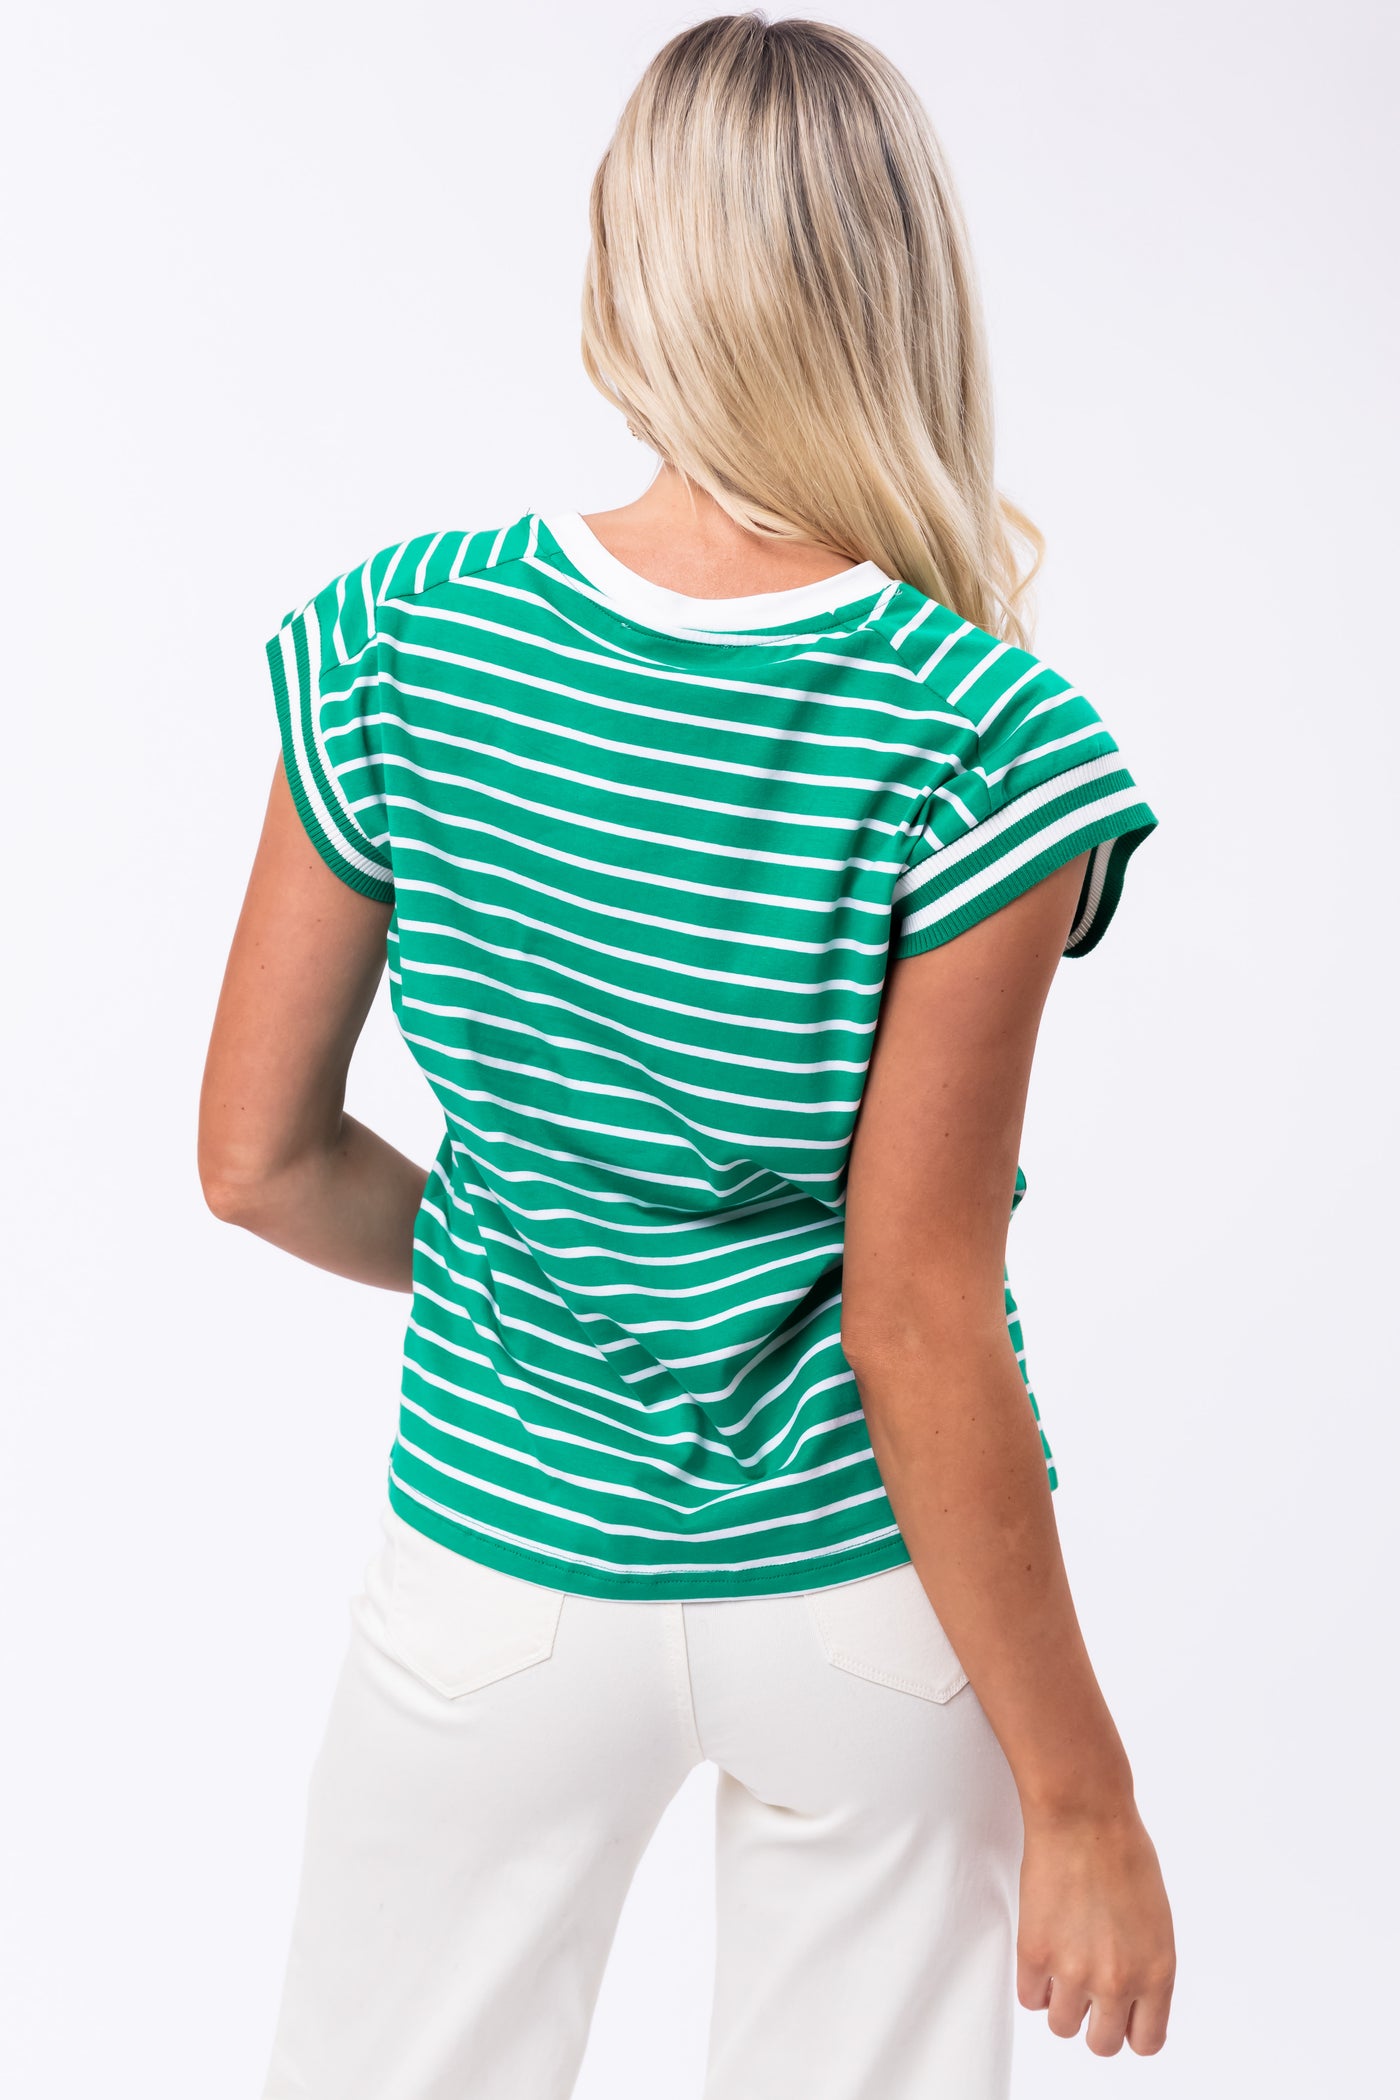 Flying Tomato Kelly Green Striped Cap Sleeve Top